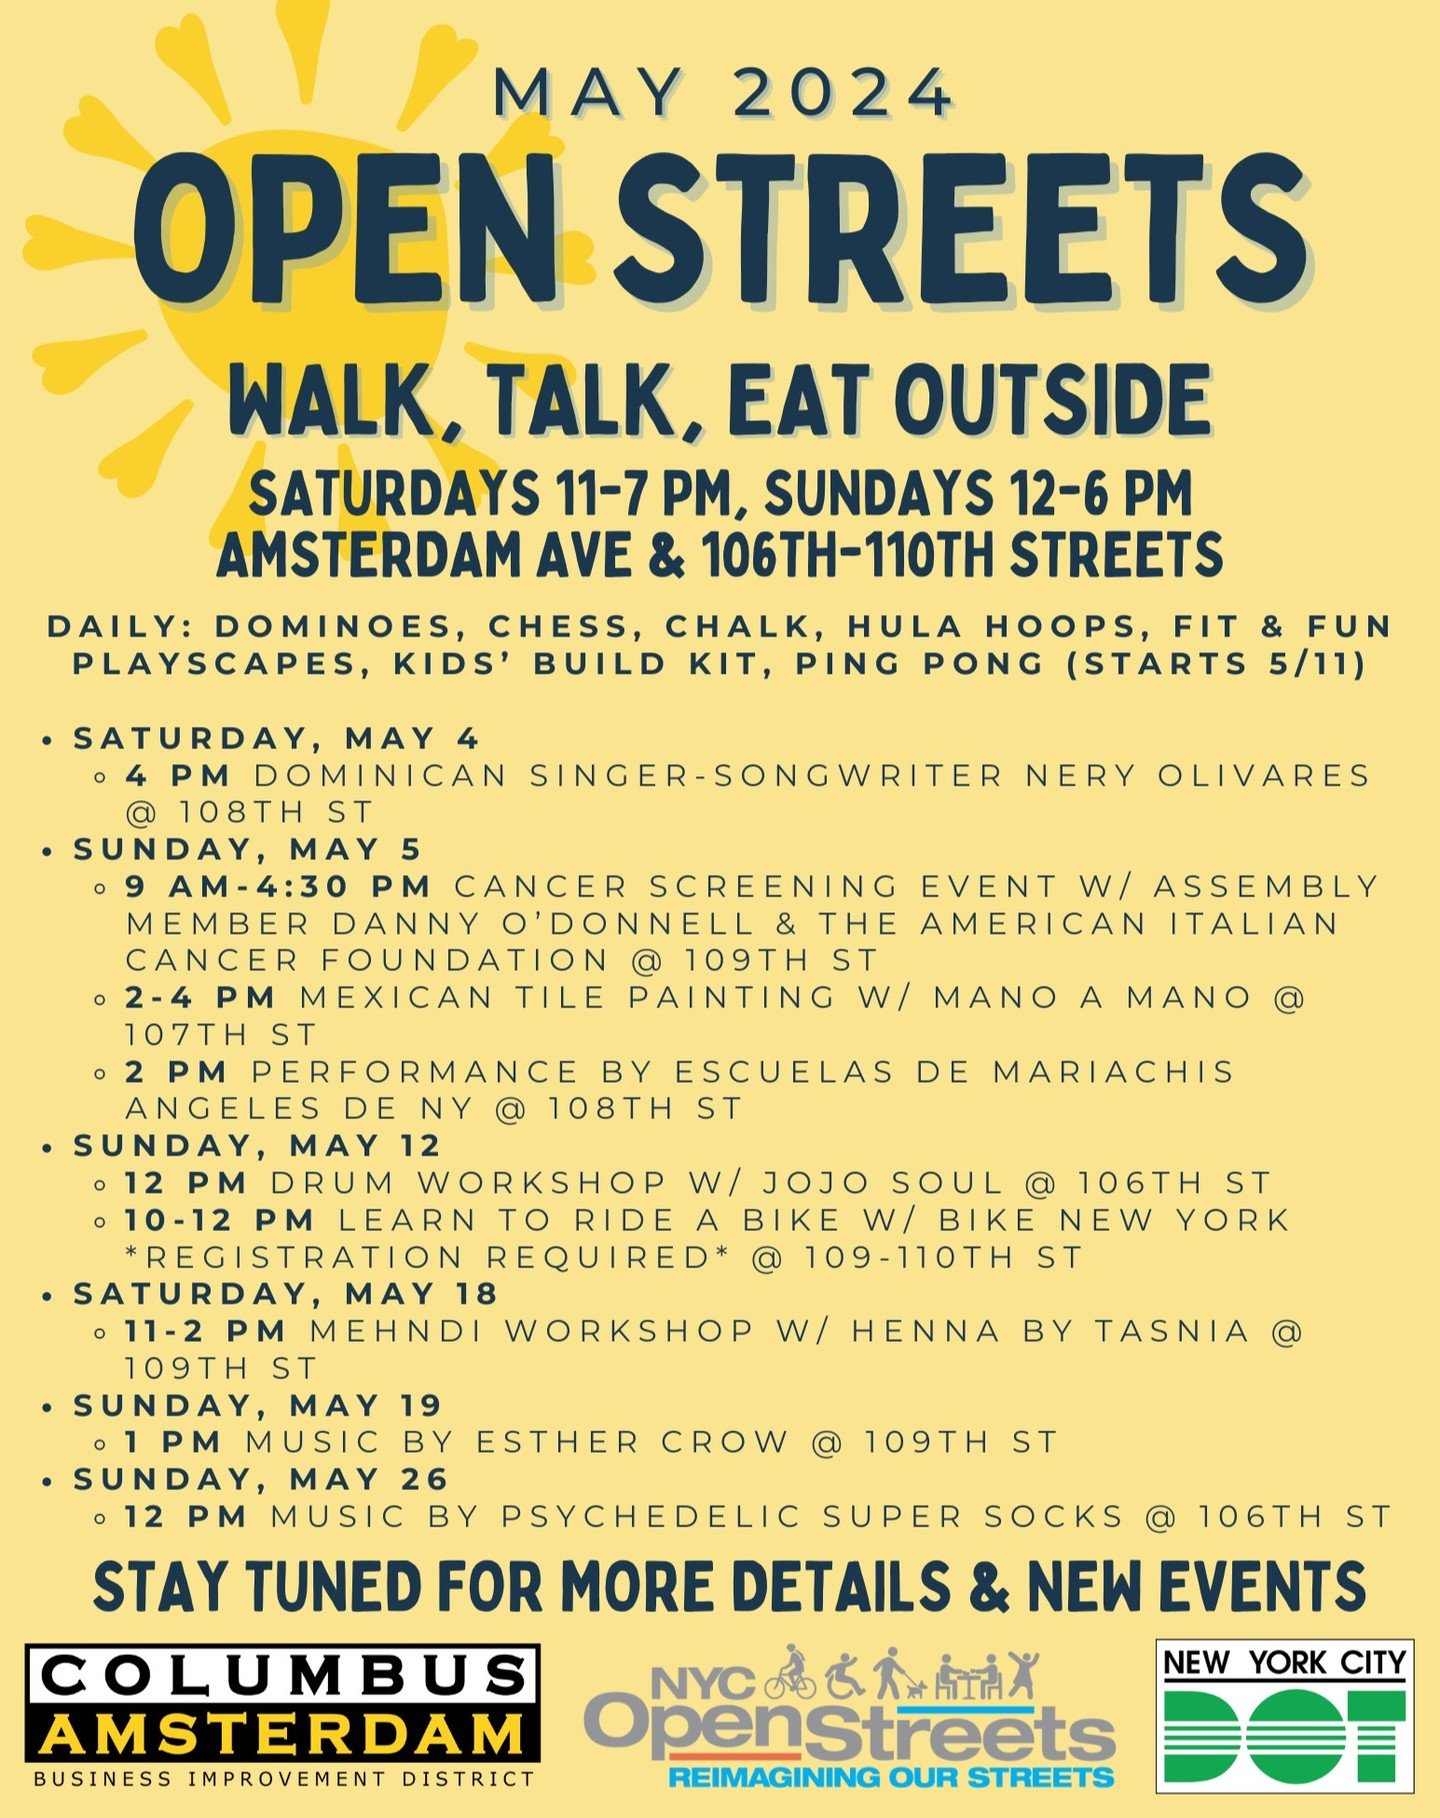 Thank you all for a great first two weeks of Open Streets, it has been great to see everyone taking advantage of the programming we have put together. The next month is full of more musical performances, classes, games, and other activities that we h